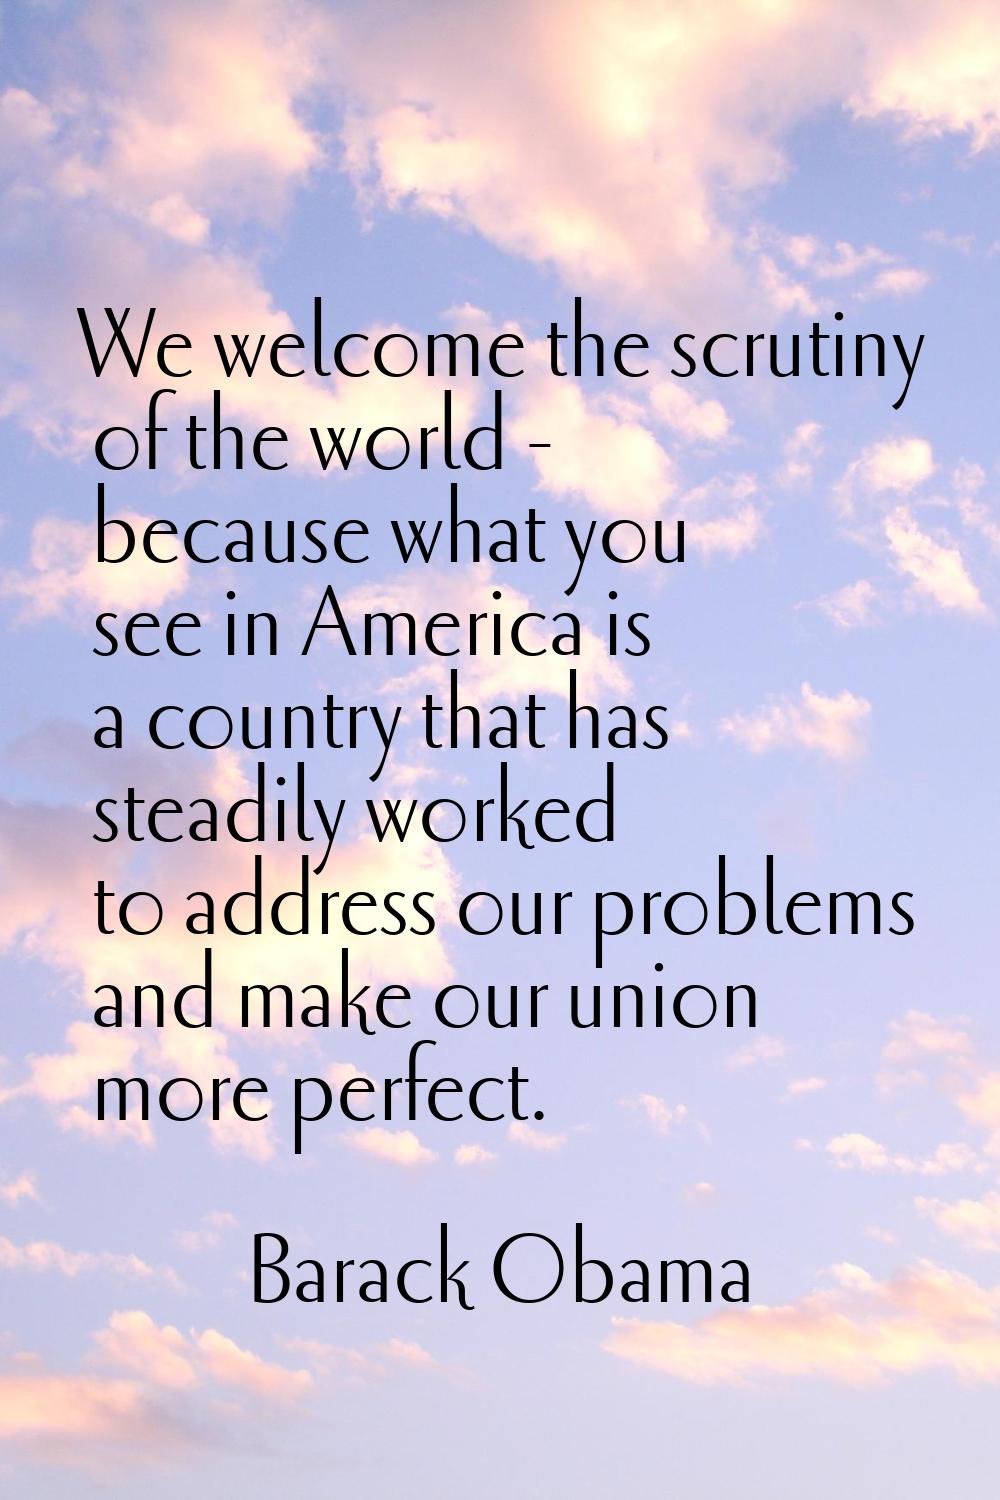 We welcome the scrutiny of the world - because what you see in America is a country that has steadi